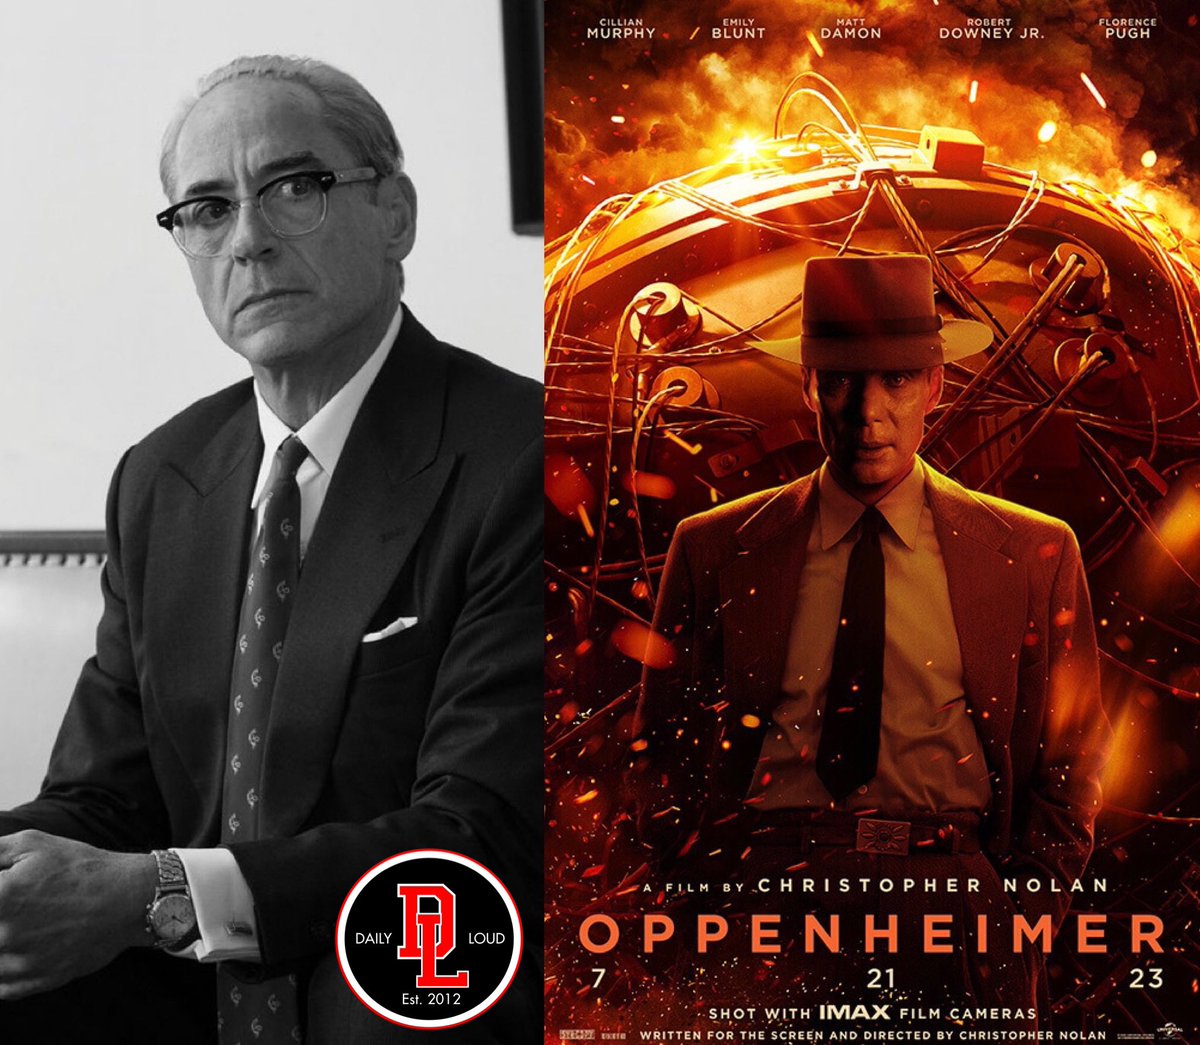 Robert Downey Jr. says joining the cast for the upcoming movie “Oppenheimer” was a “No-Brainer'

“I had been cooling my heels for about a year...because I had been working super consistently. But this was Christopher Nolan, doing something that was important to him. The cast was…